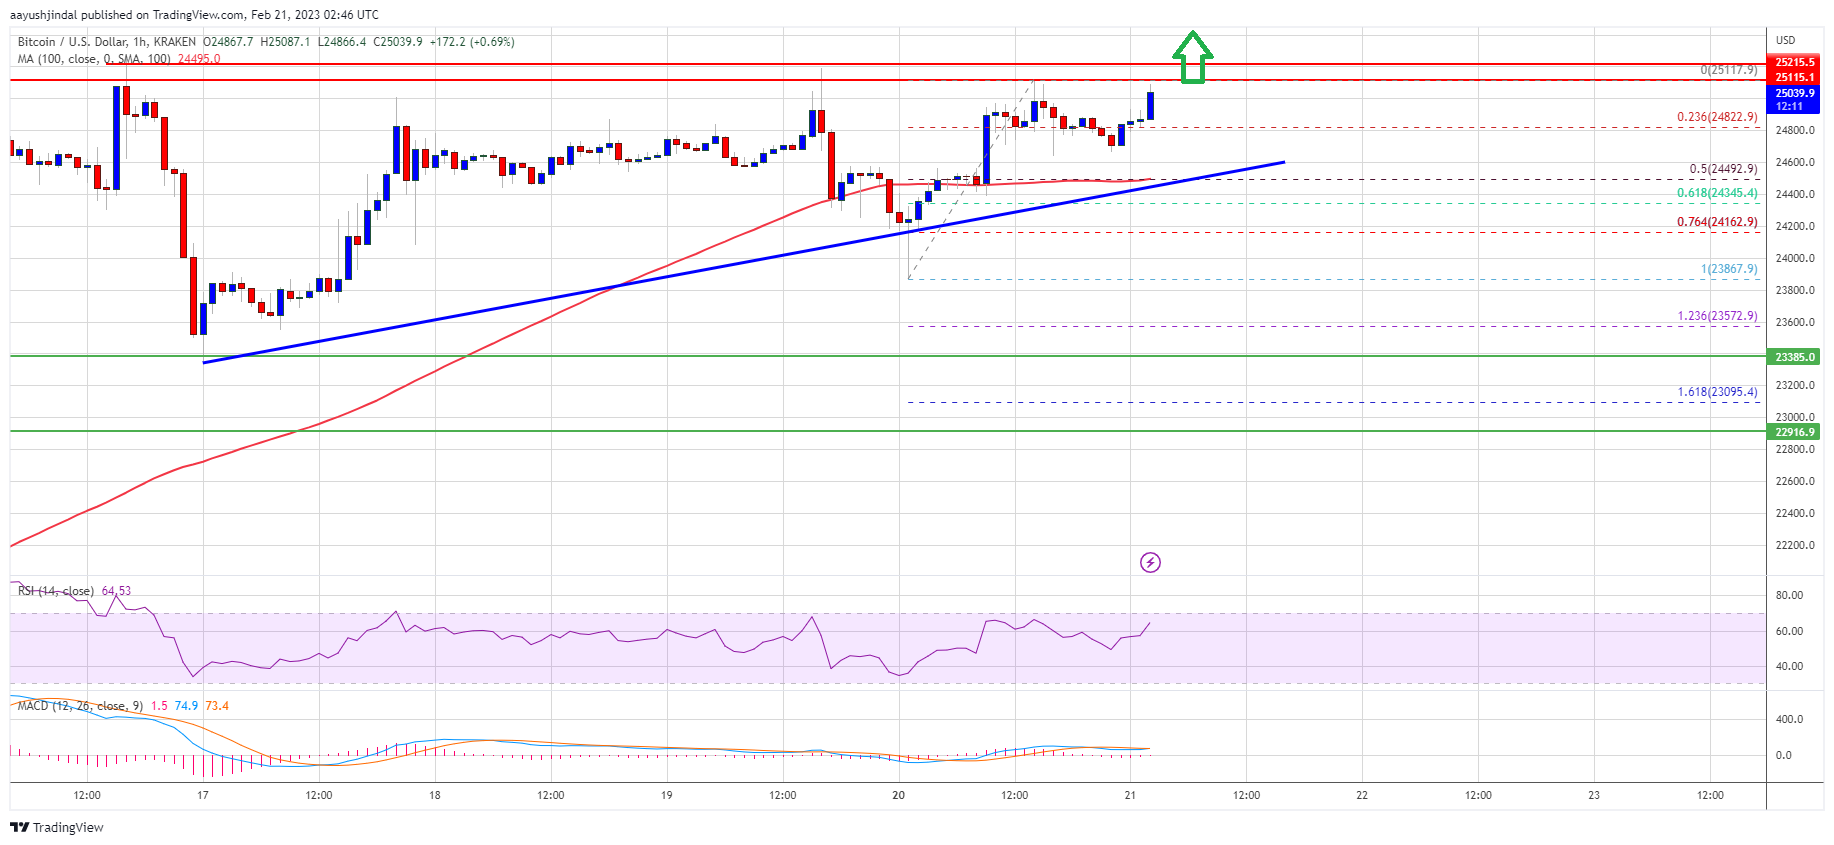 Bitcoin Value Might Skyrocket To K If It Clears This Resistance